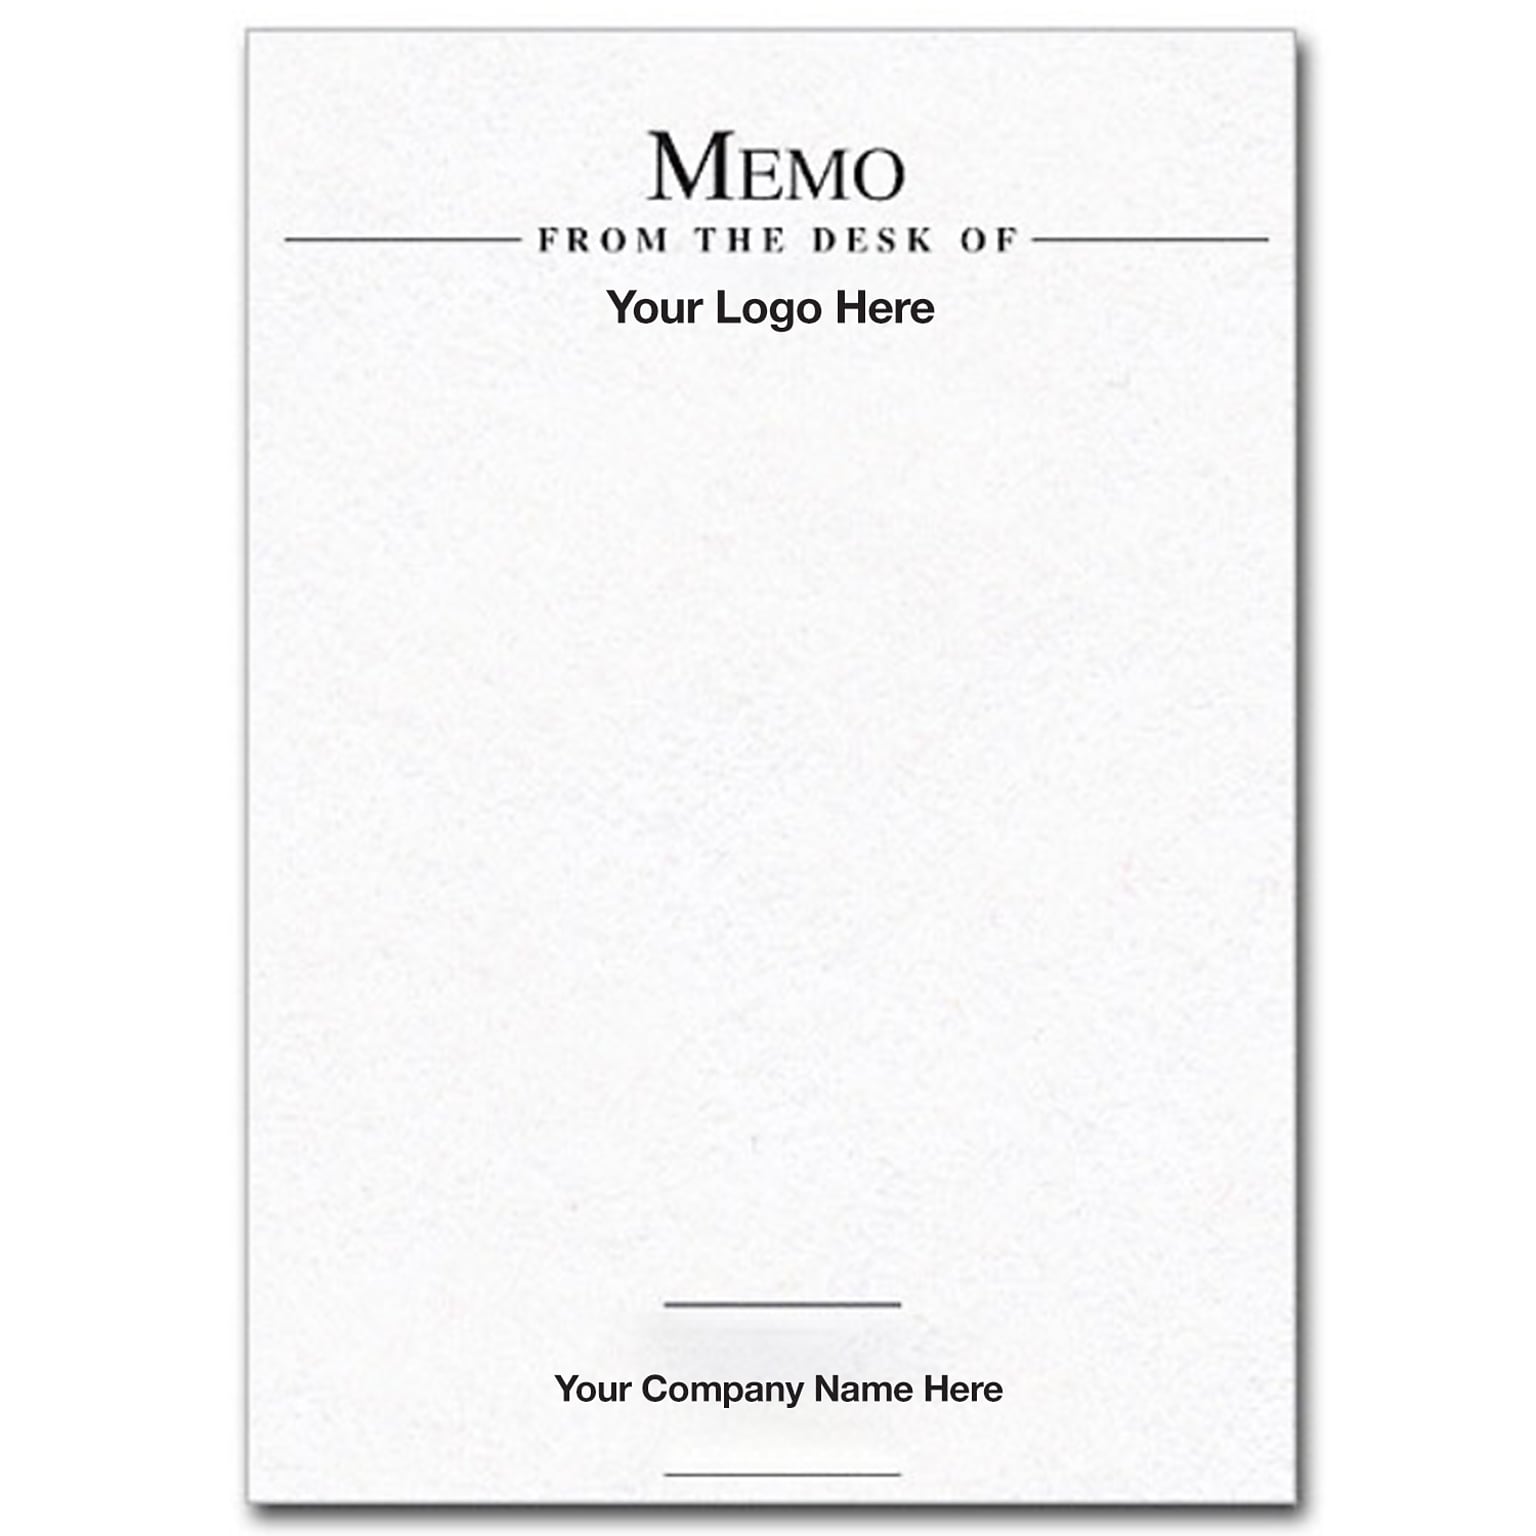 Custom Memo Pads, White Smooth 24# Text Stock, 8.5 x 11, 2 Standard Inks, Flat Ink, 100 Sheets per Pad